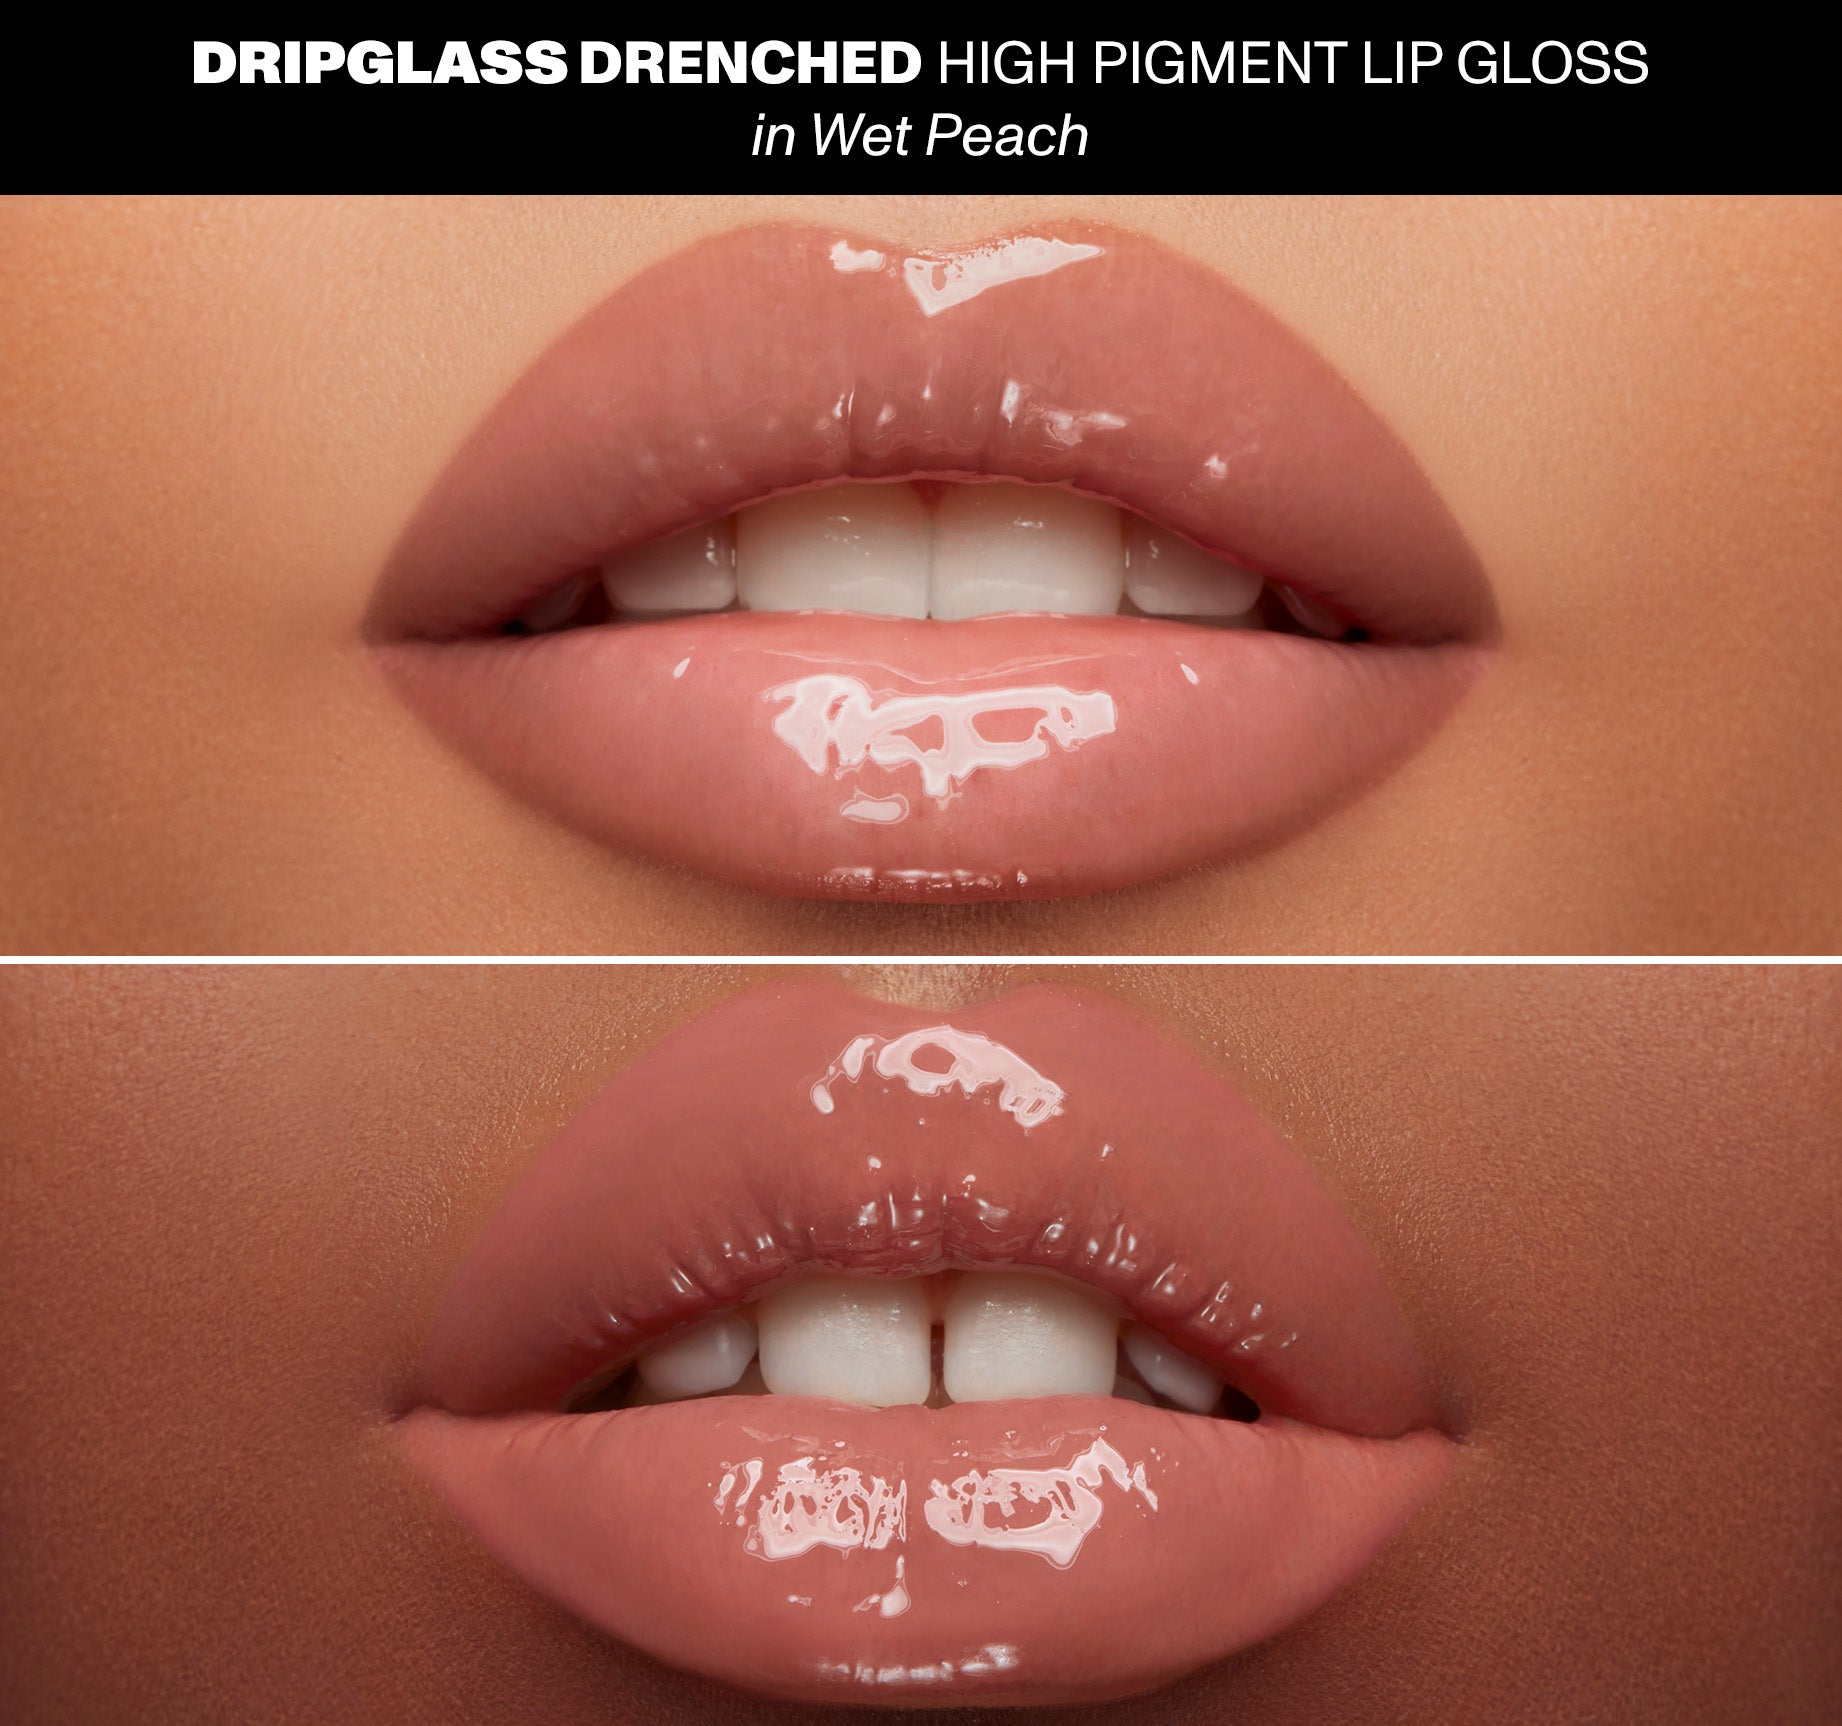 Dripglass Drenched High Pigment Lip Gloss - Wet Peach - Image 4